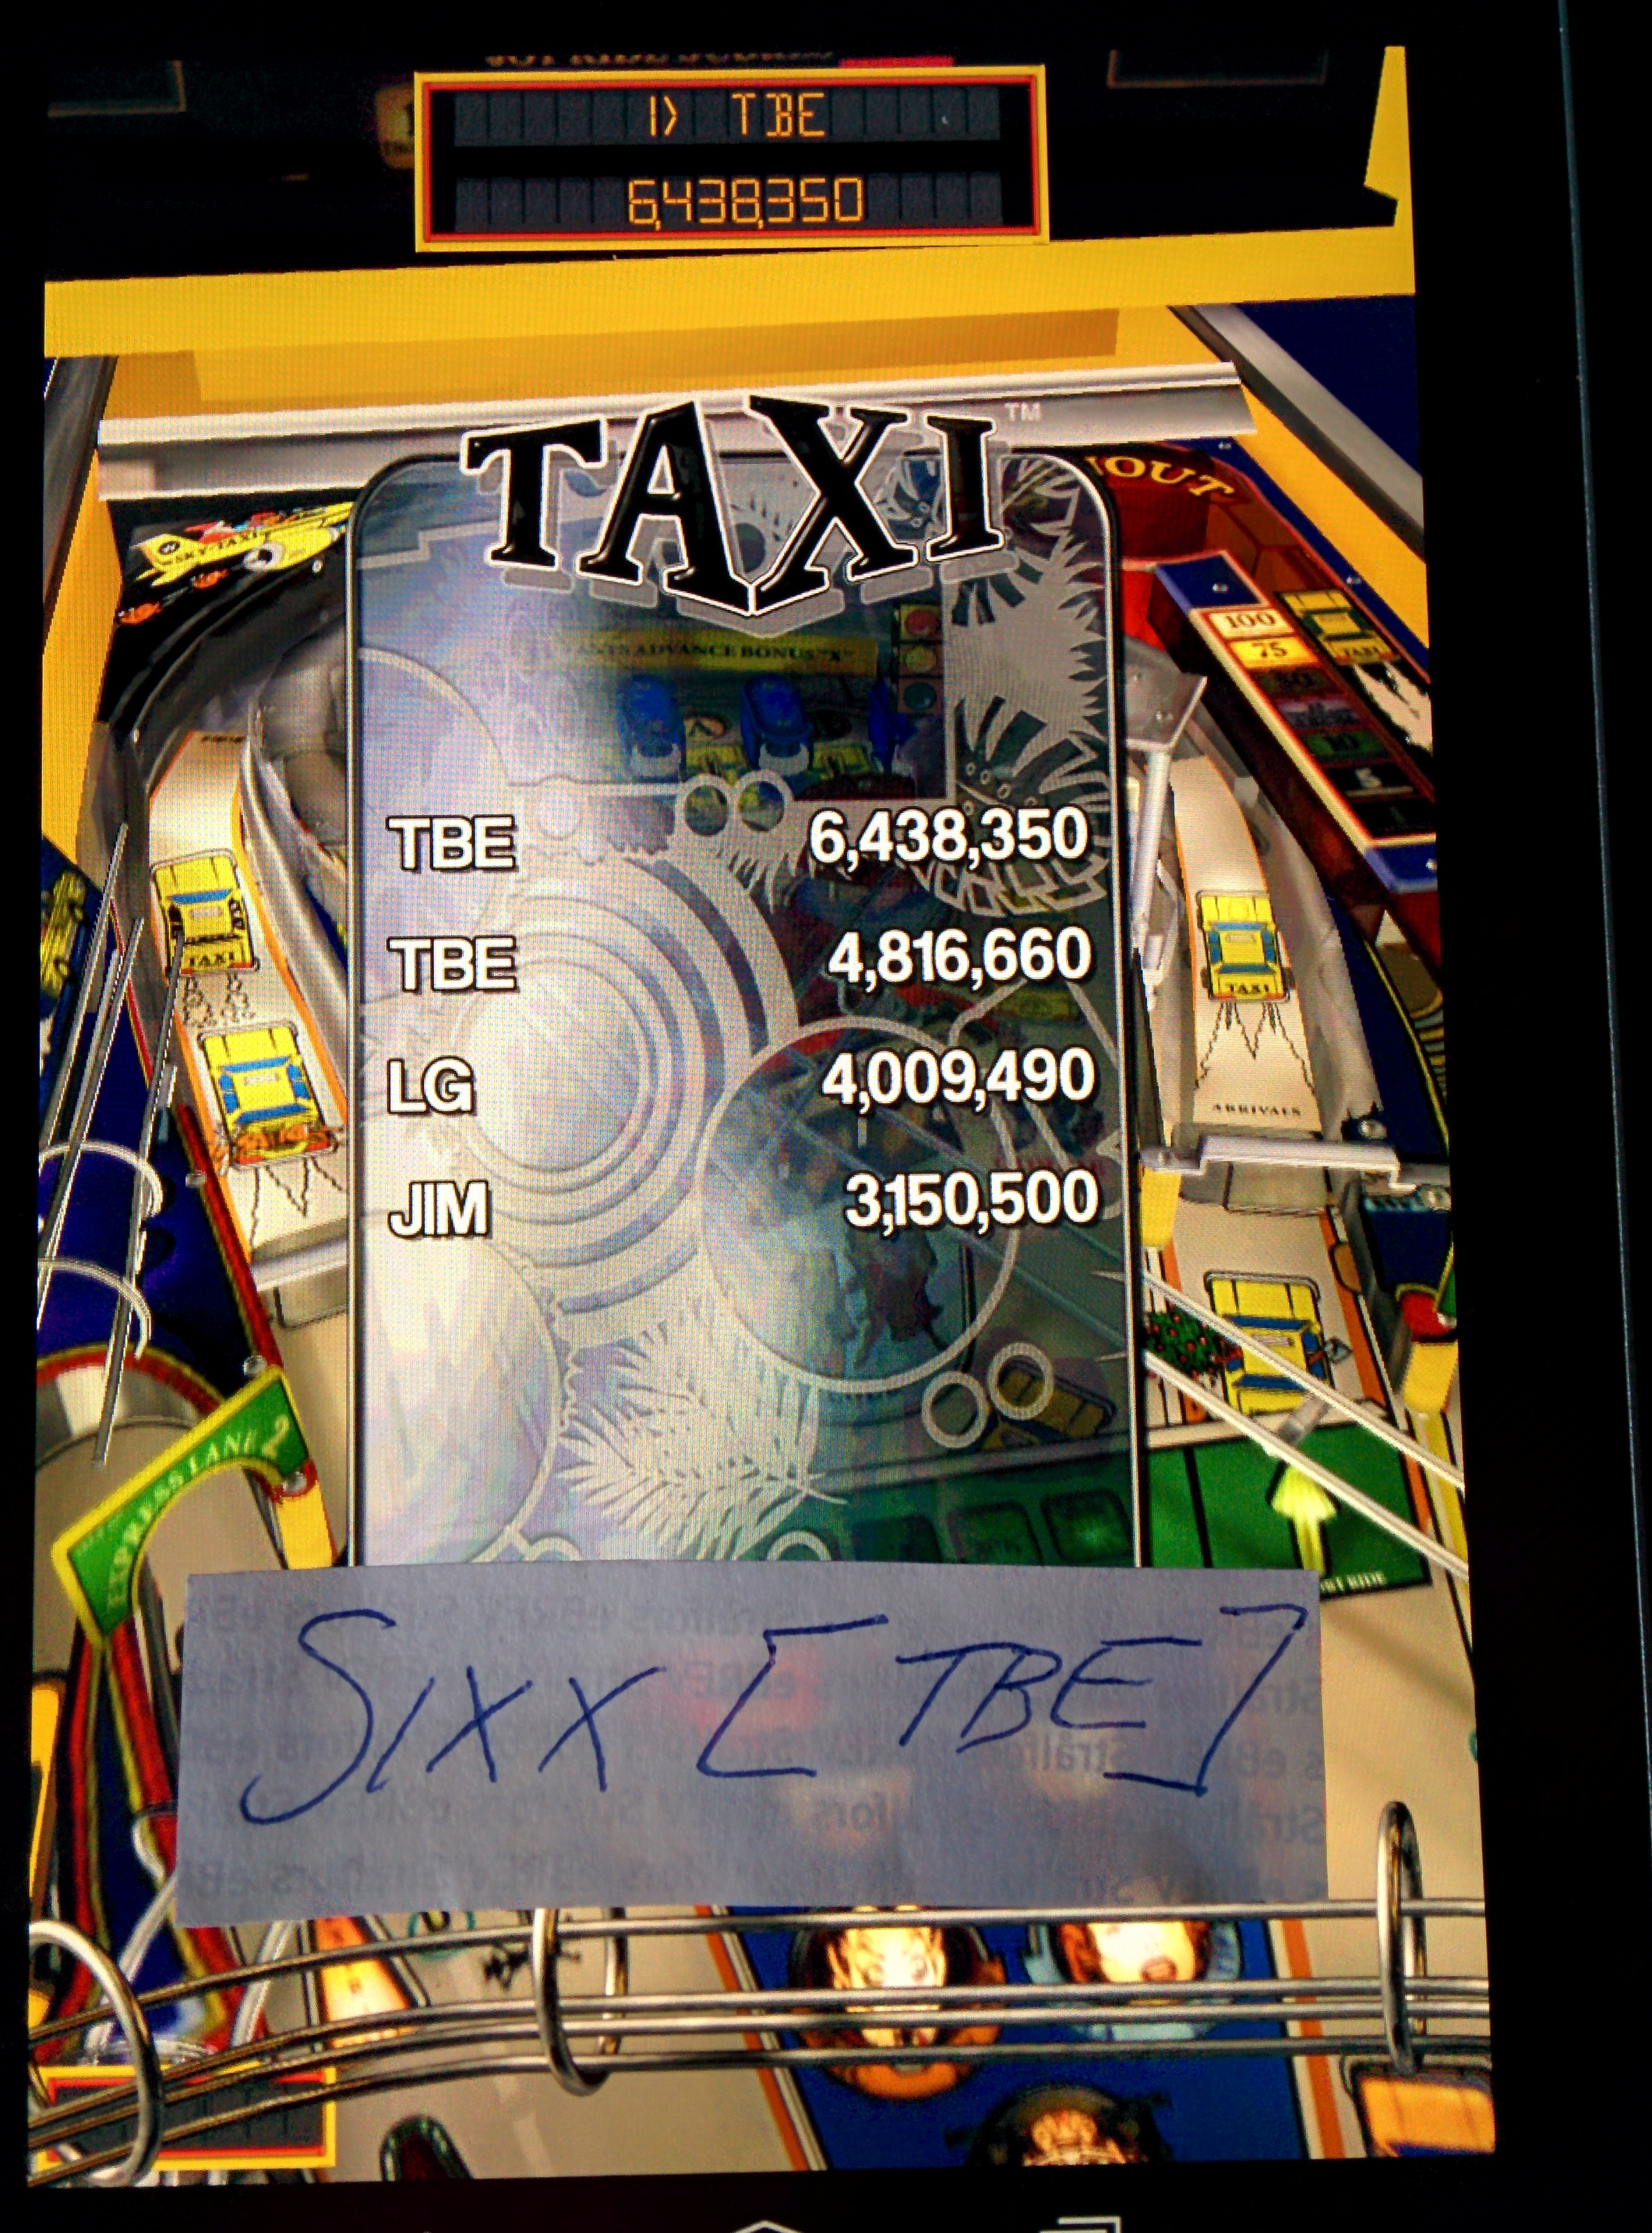 Sixx: Pinball Arcade: Taxi (Android) 6,438,350 points on 2014-08-19 23:26:57